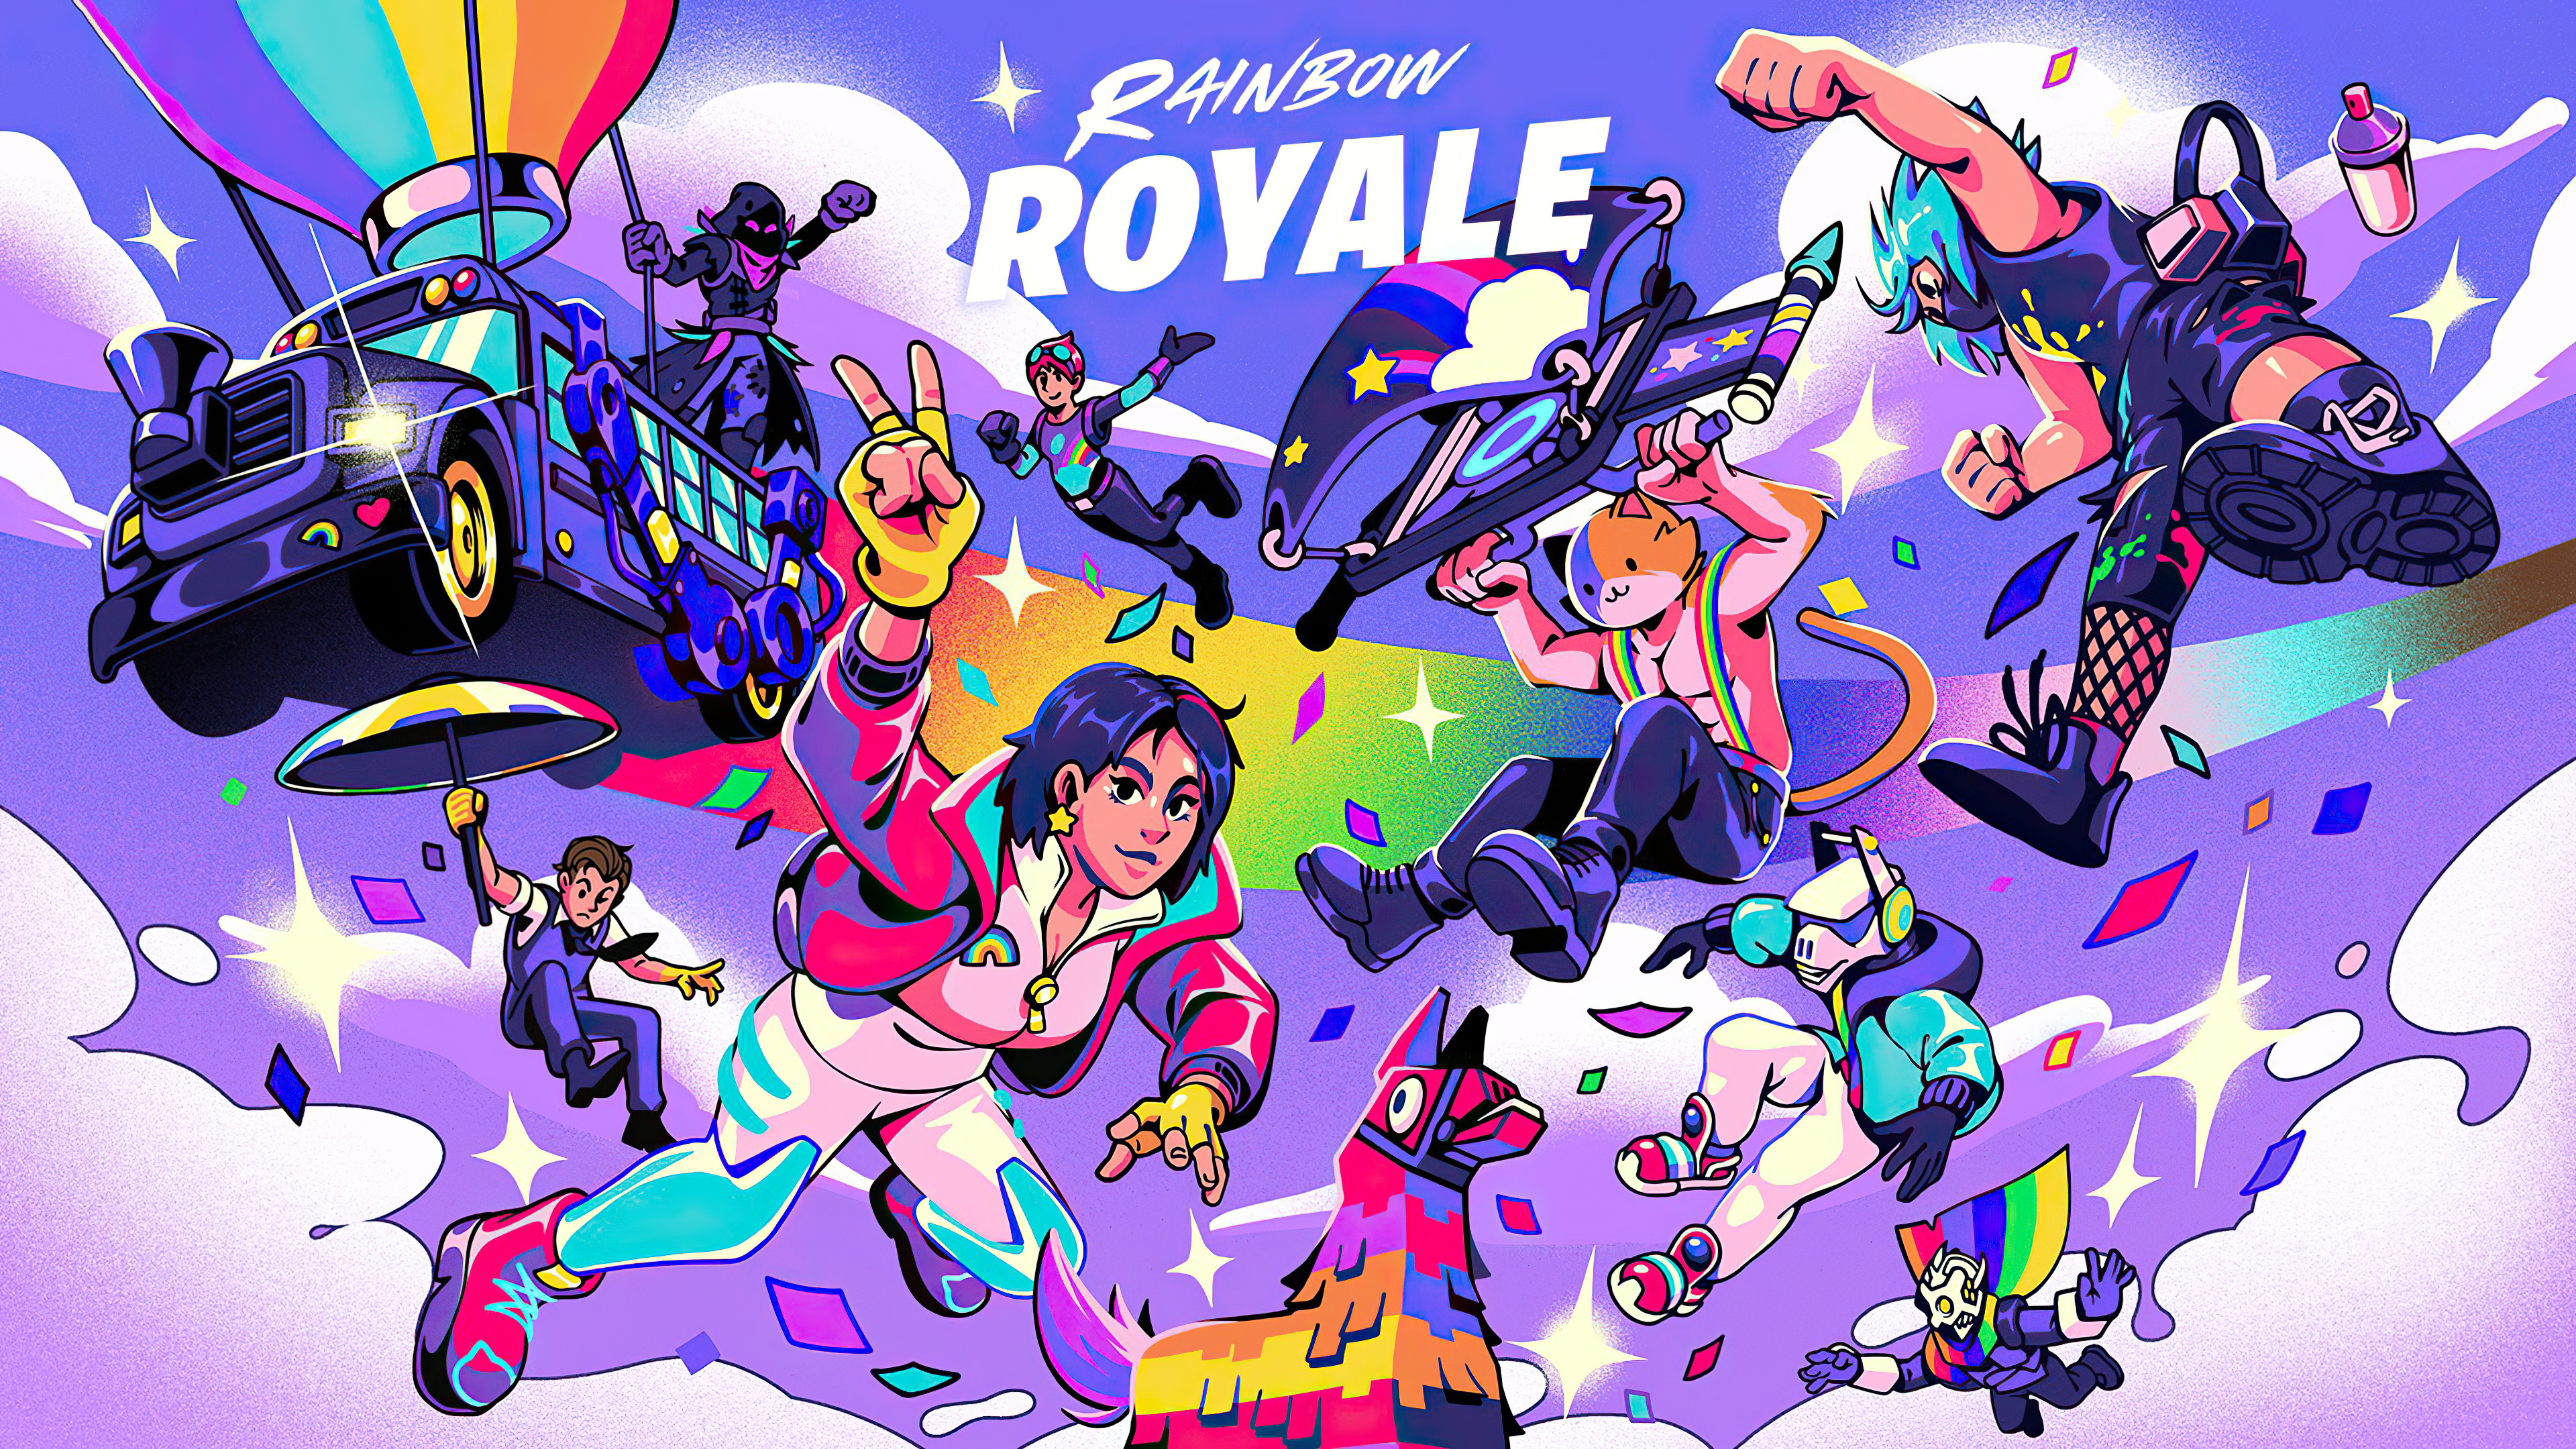 Fortnite rainbow royale battle bus hd games k wallpapers images backgrounds photos and pictures